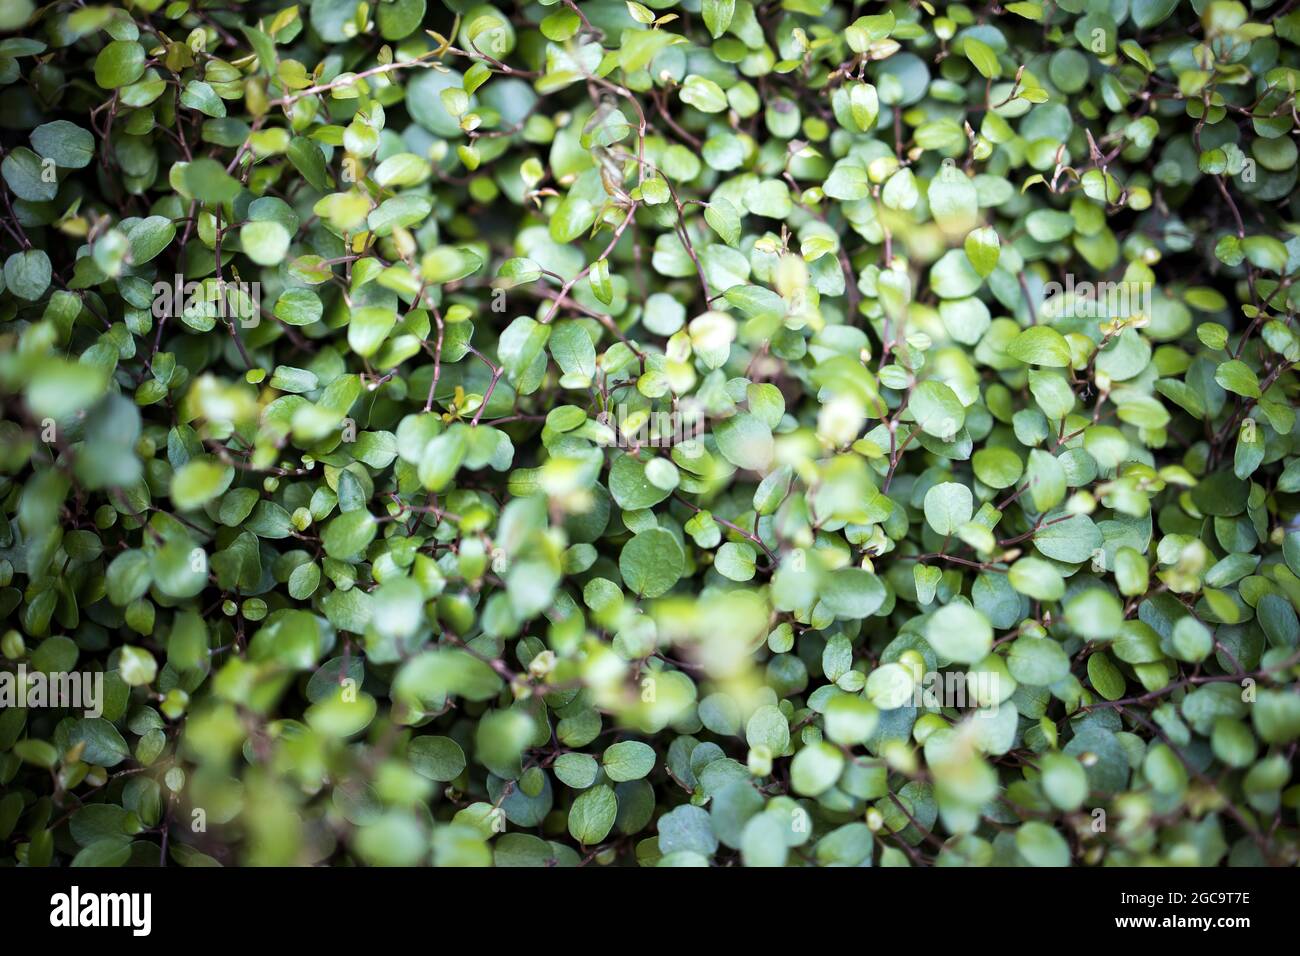 Callisia repens, also known as creeping inchplant, Bolivian Jew or turtle vine, is a succulent creeping plant from the family Commelinaceae. Plant in Stock Photo